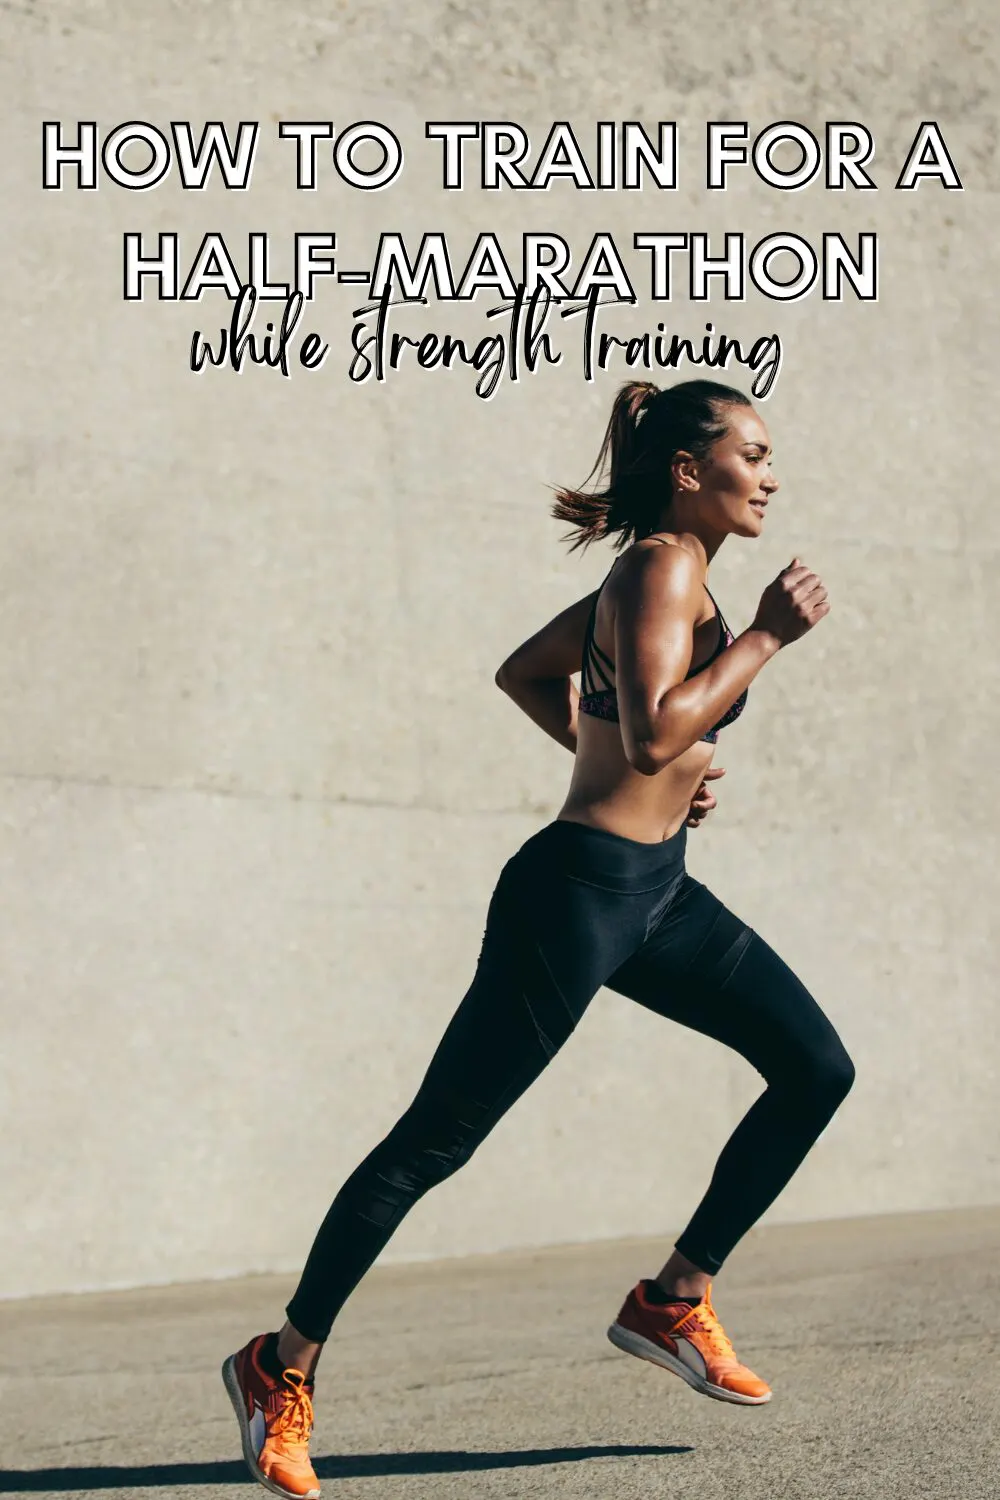 How to train for a half marathon while strength training - The